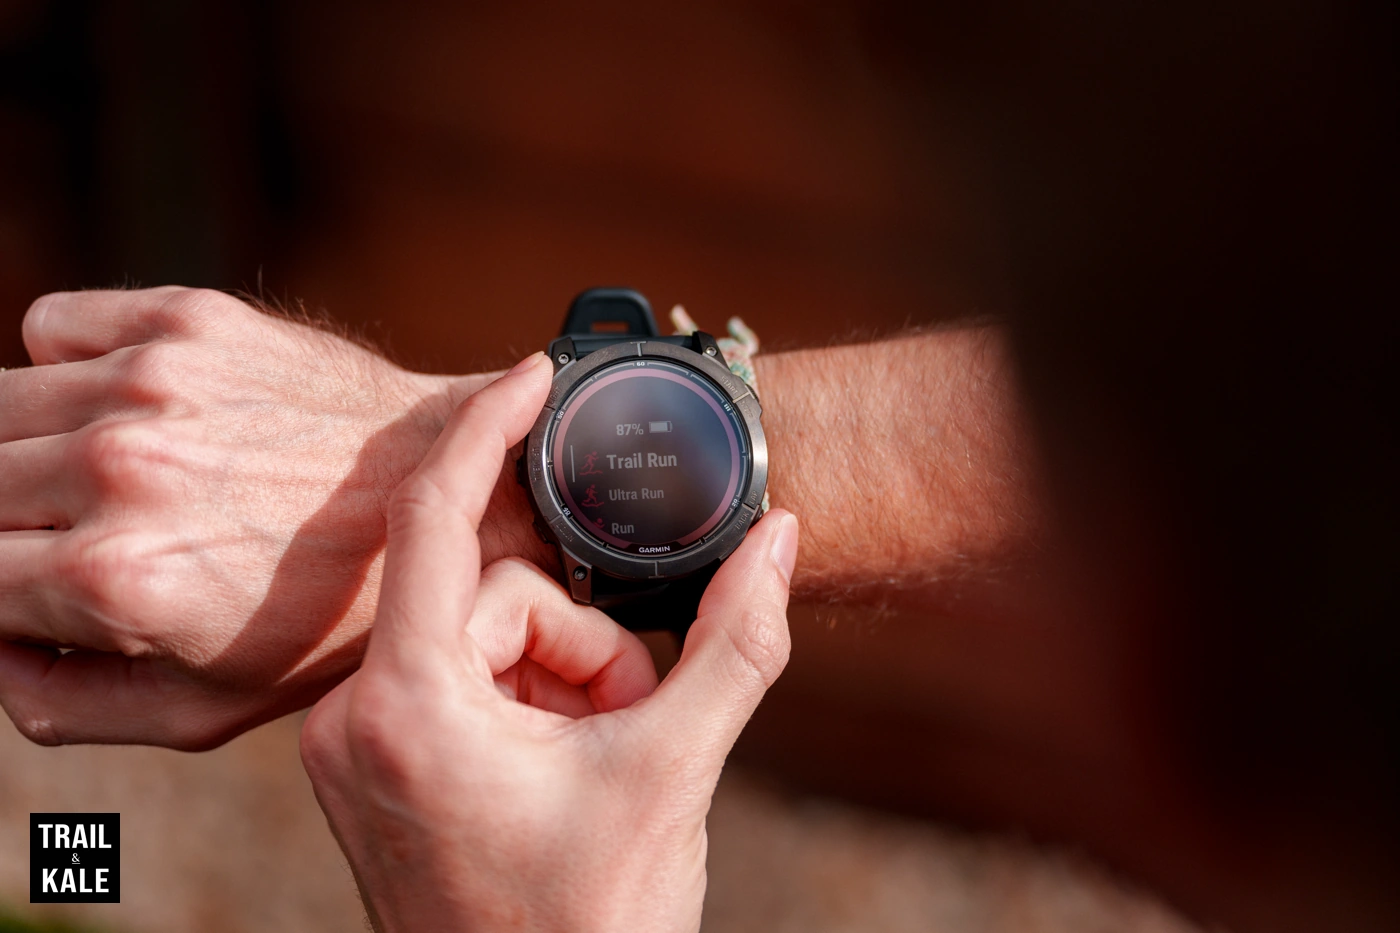 Selecting one of a long list of activities you can use the Garmin Fenix 7X Pro for.